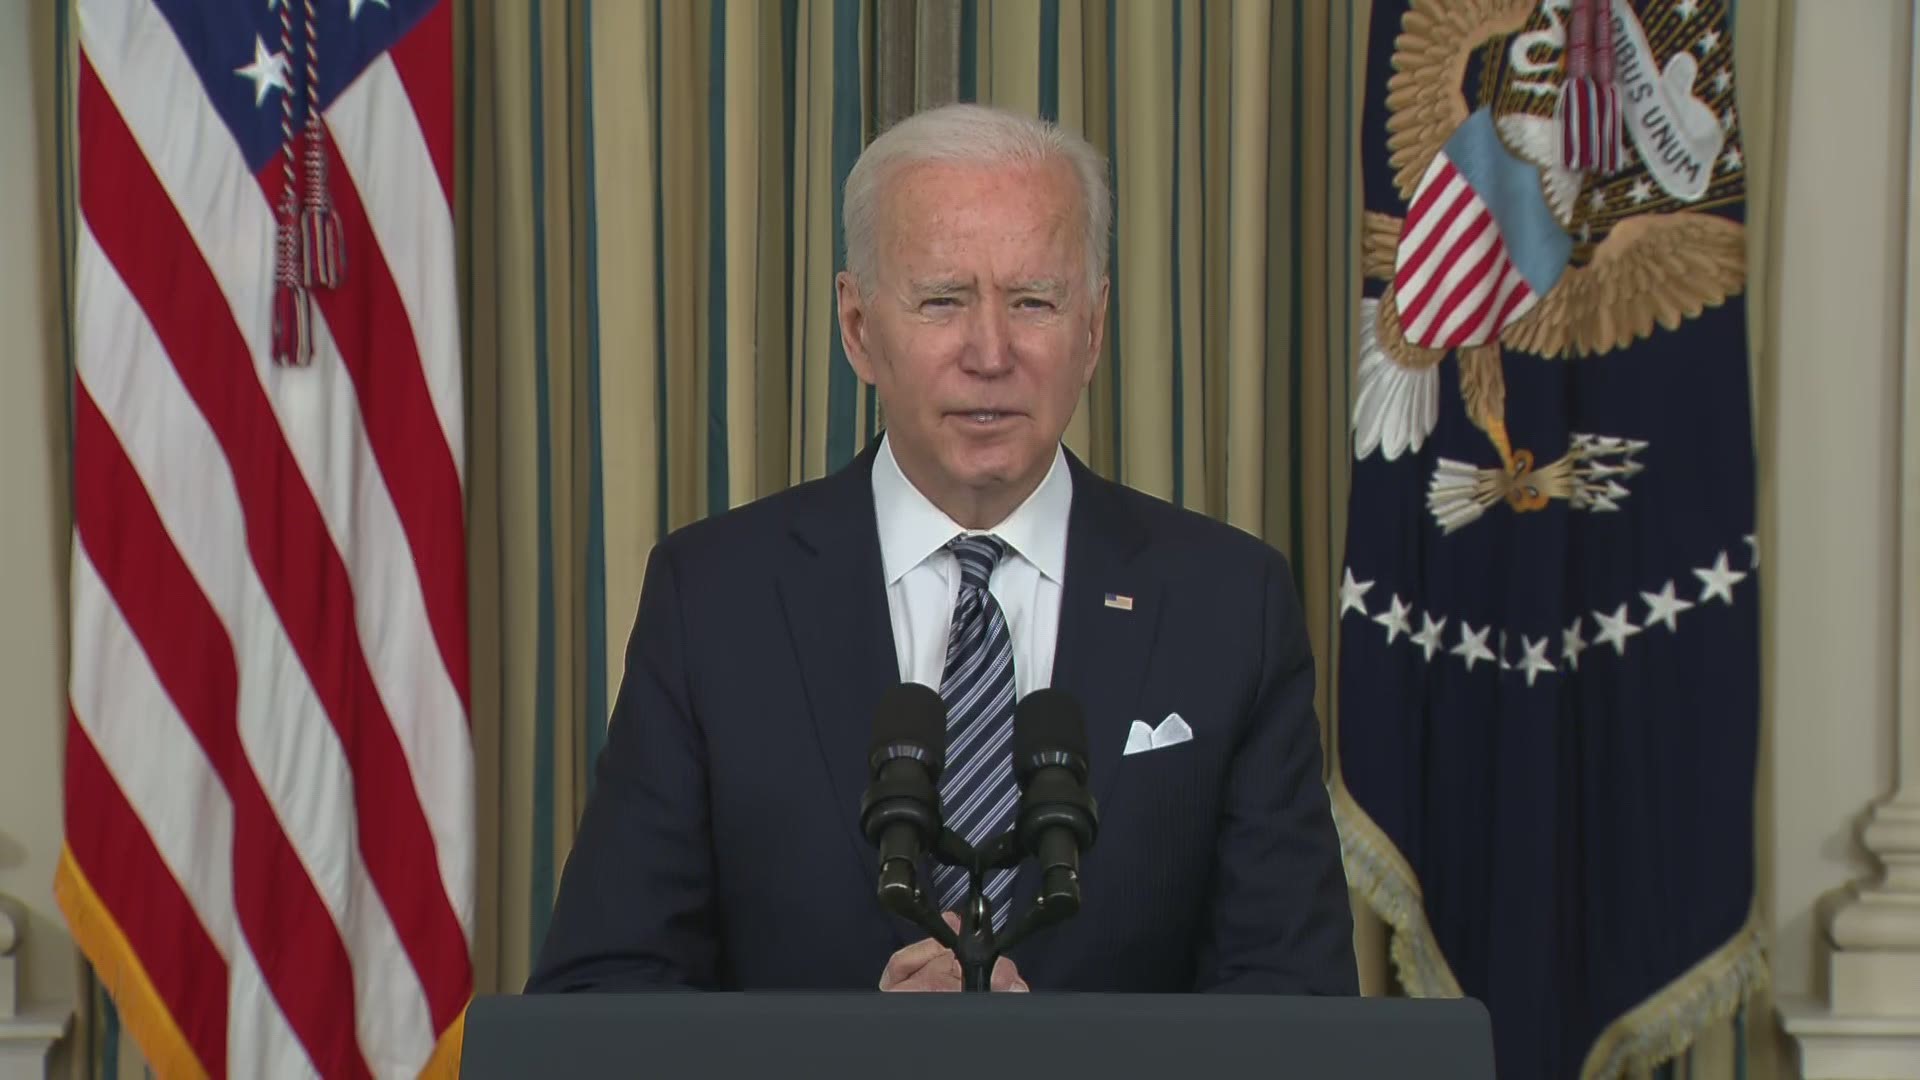 Biden addresses the $1.9T COVID-19 relief plan signed into law last week.